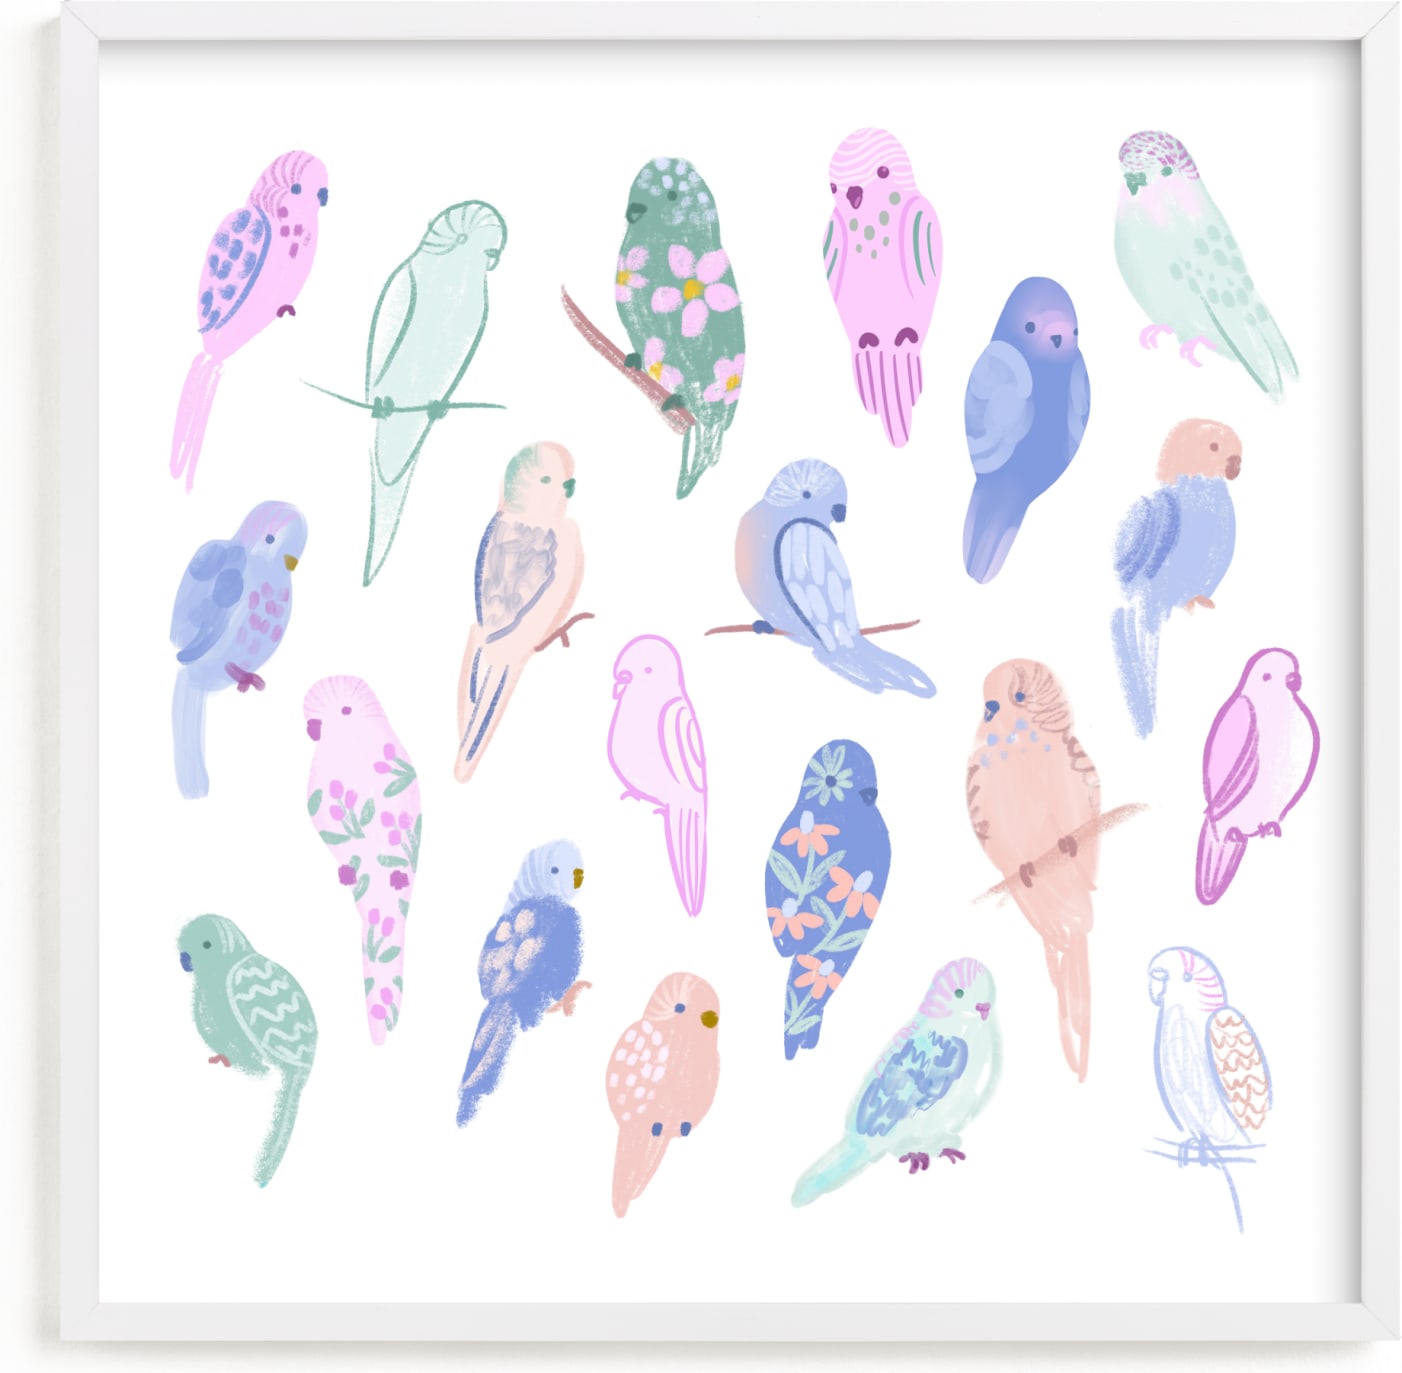 This is a colorful kids wall art by Tishya Oedit called Budgie Flock.